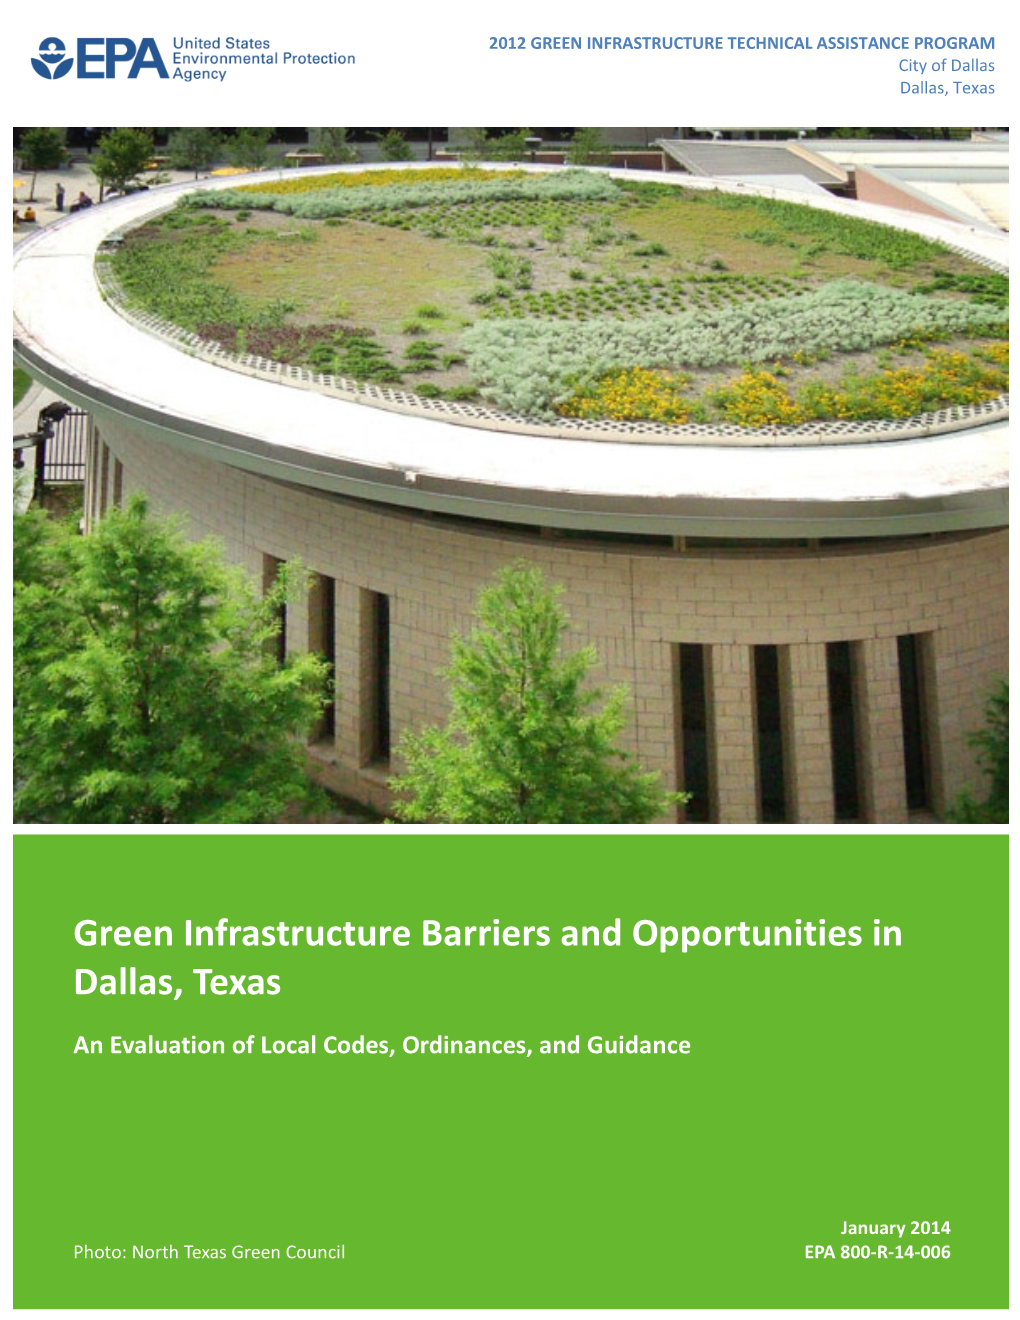 Green Infrastructure Barriers and Opportunities in Dallas, Texas